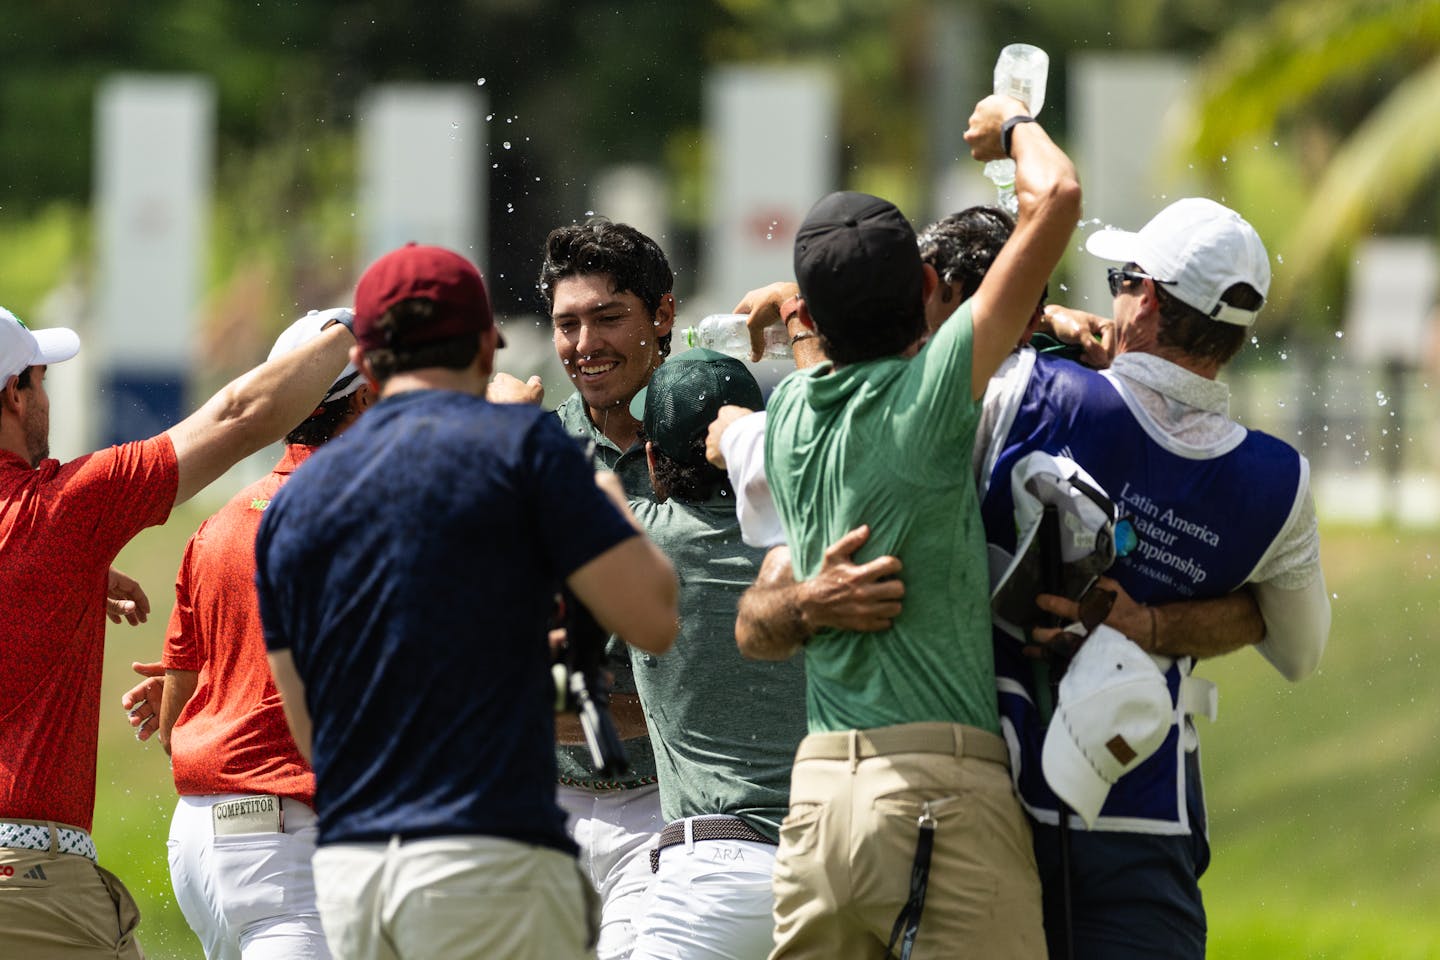 Santiago de la Fuente (C) of Mexico is doused by friends and players after winning on the No. 18 green.